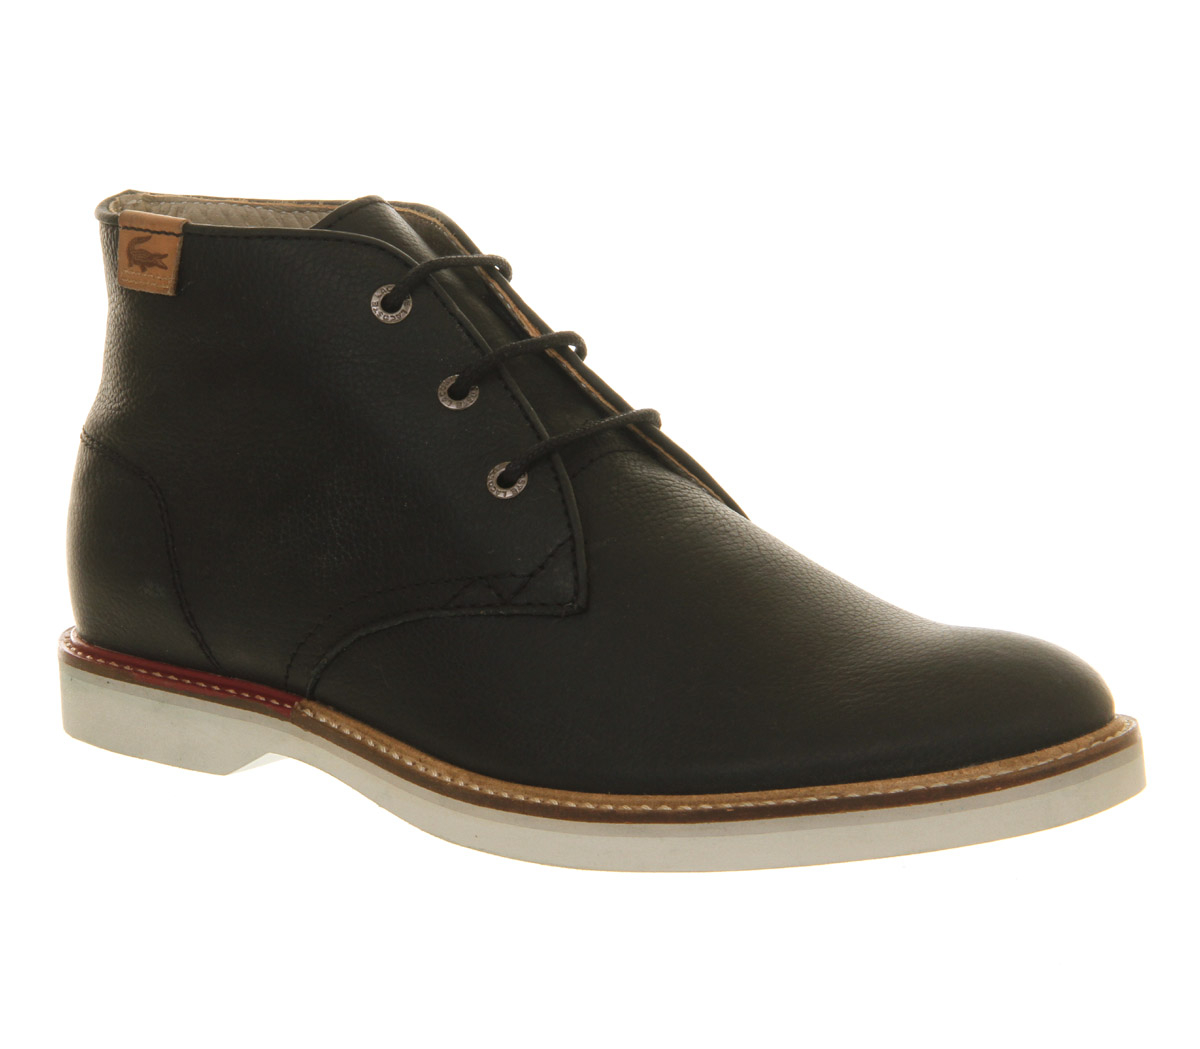 Lacoste Leather Sherbrooke Boot in Black for Men - Lyst